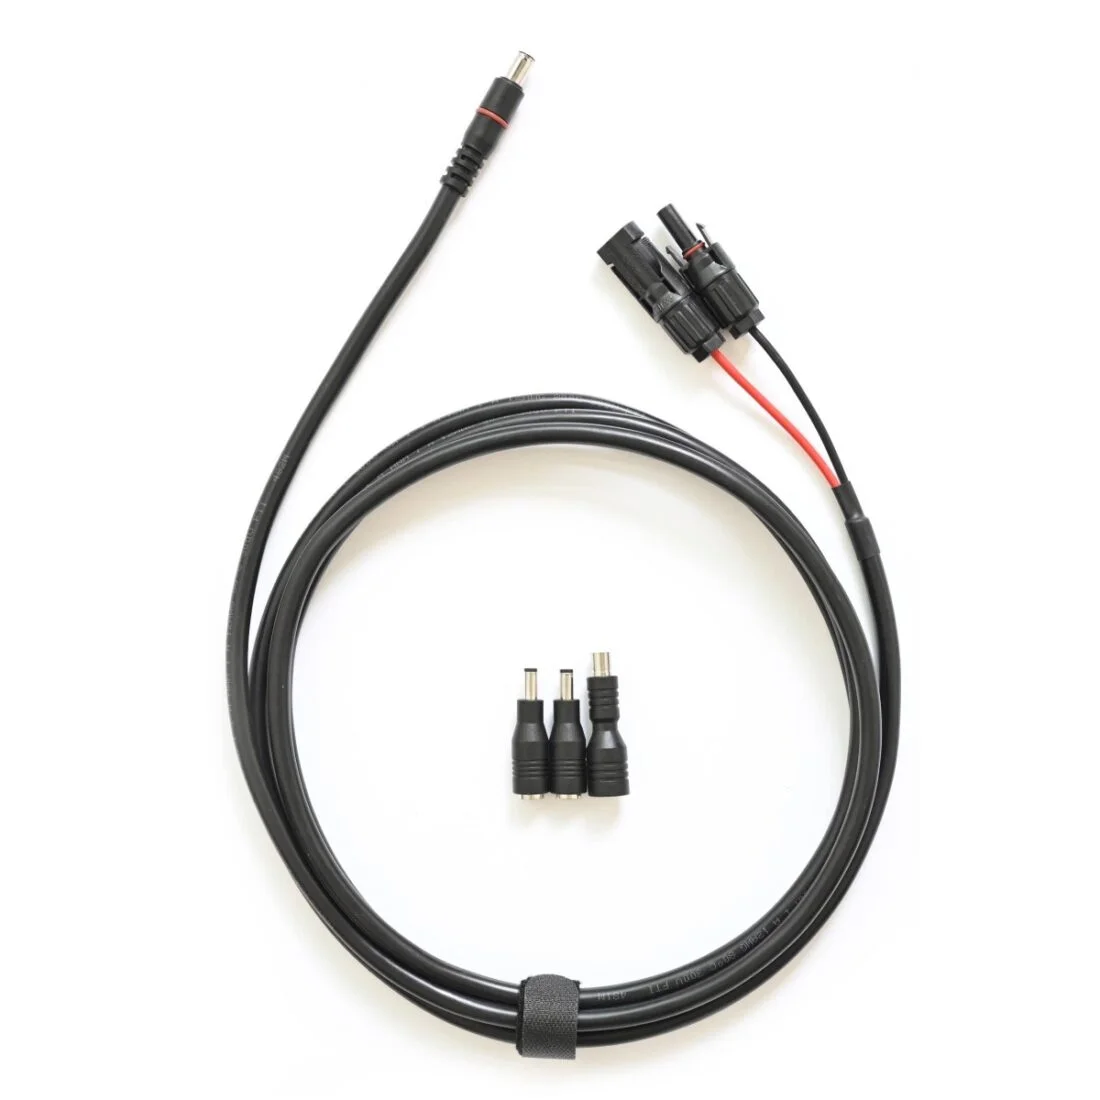 MC4 Compatible to DC7909 Cable - 3 Metres